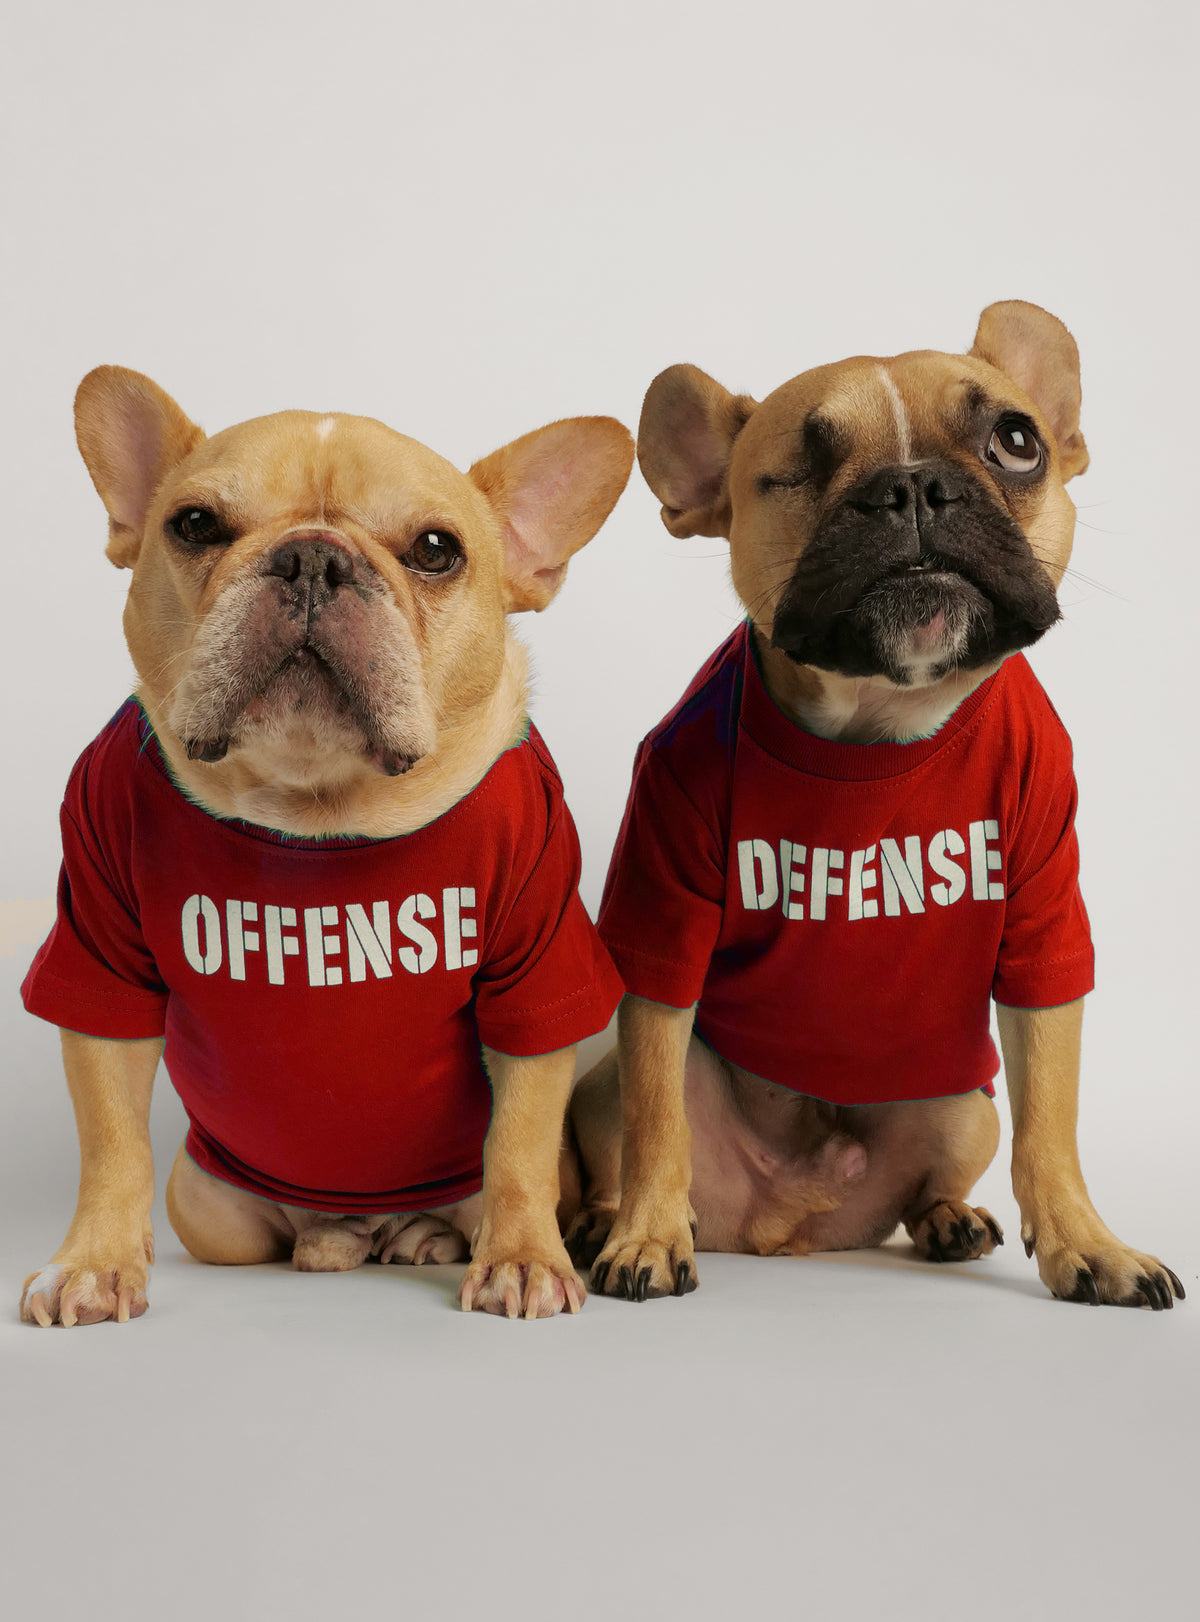 Offense + Defense (2-Pack) Dog Tee